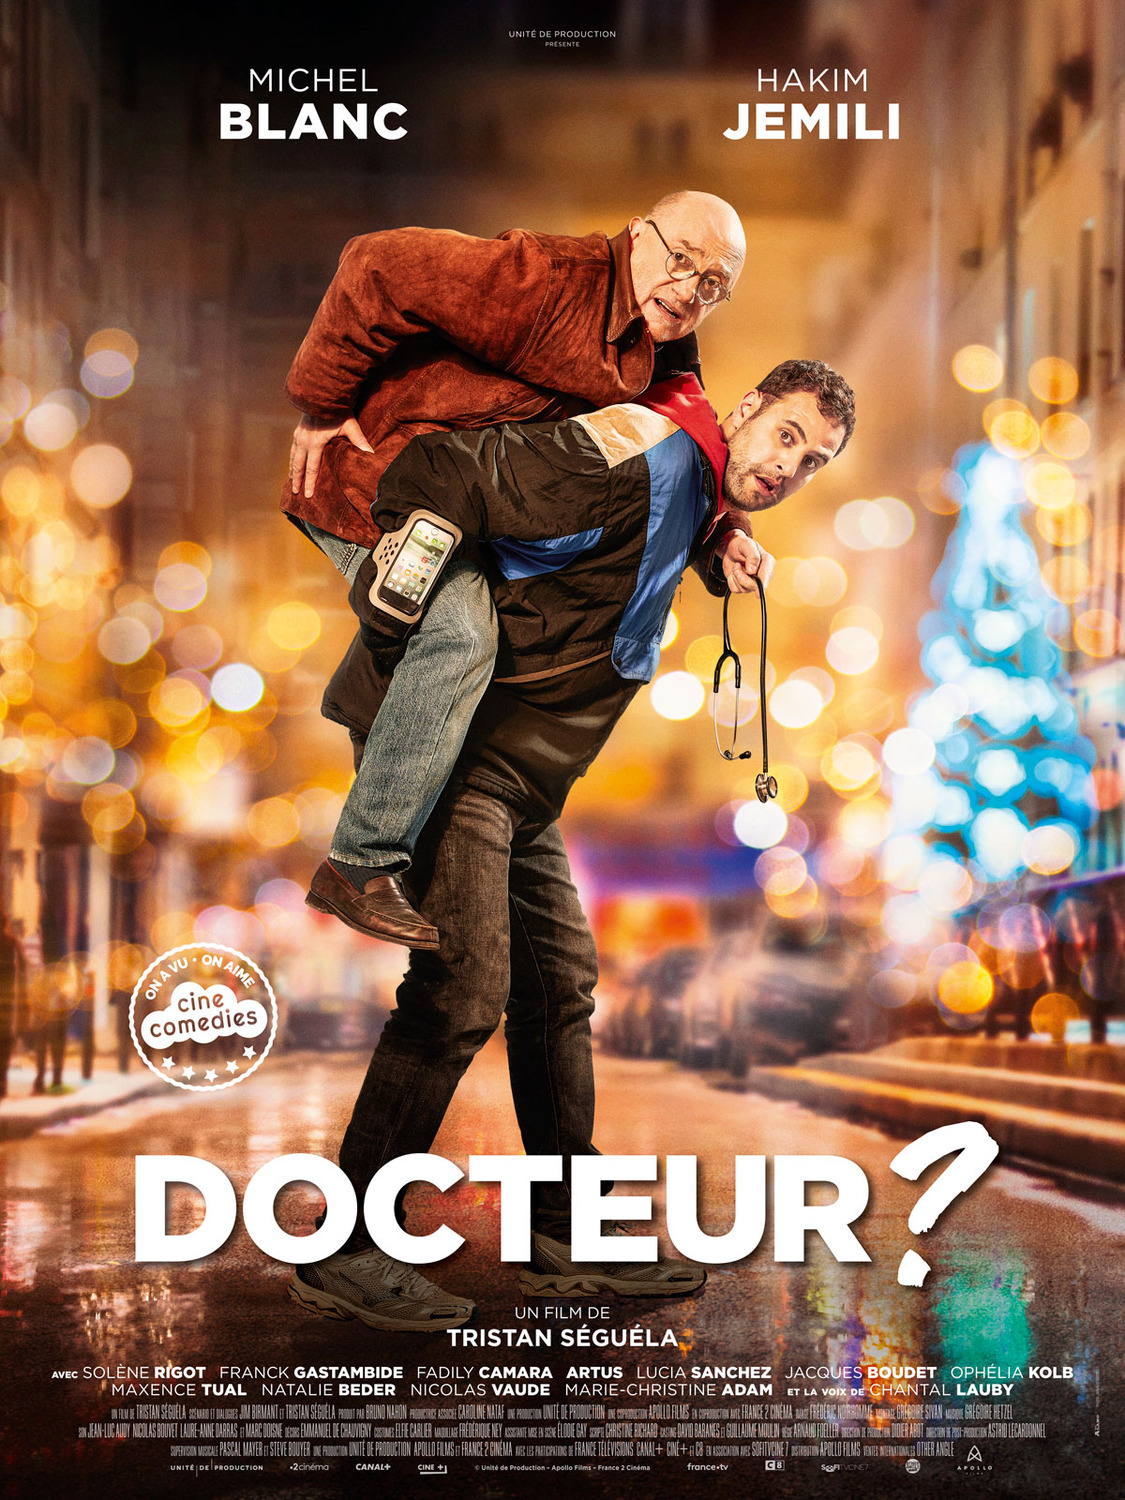 Extra Large Movie Poster Image for Docteur? 